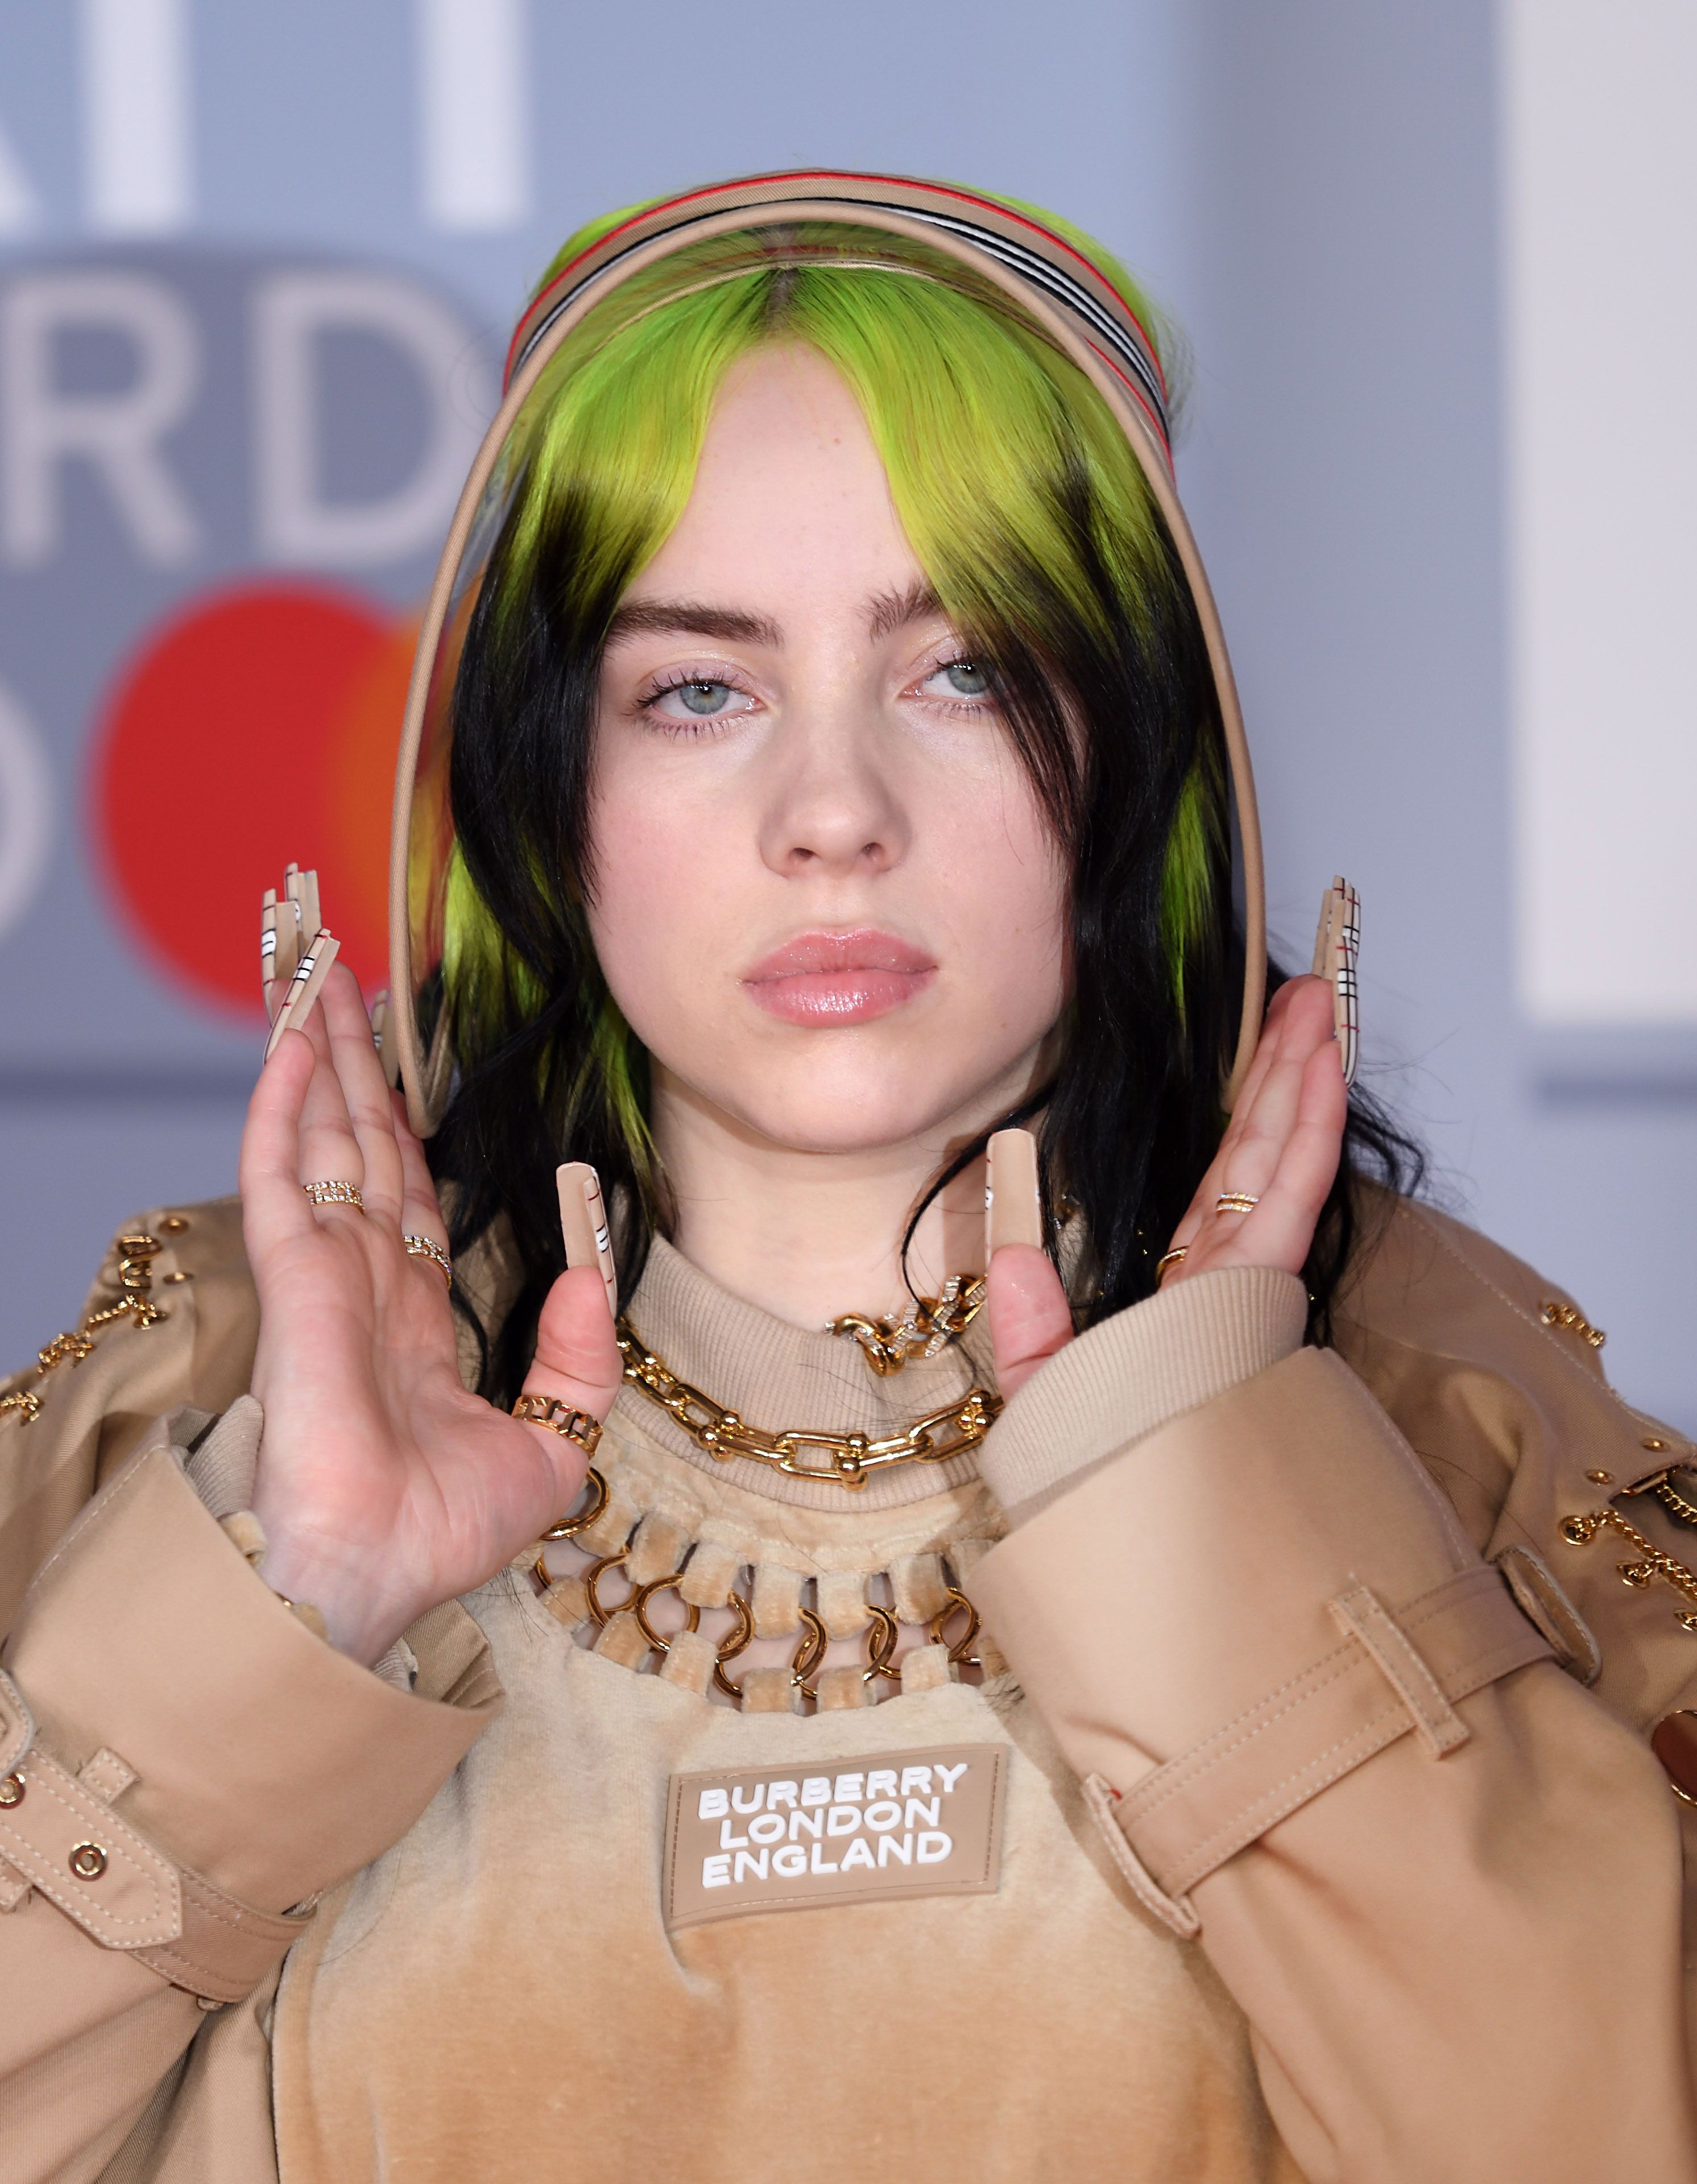 Billie Eilish Reveals New Details About Why She Went Blonde